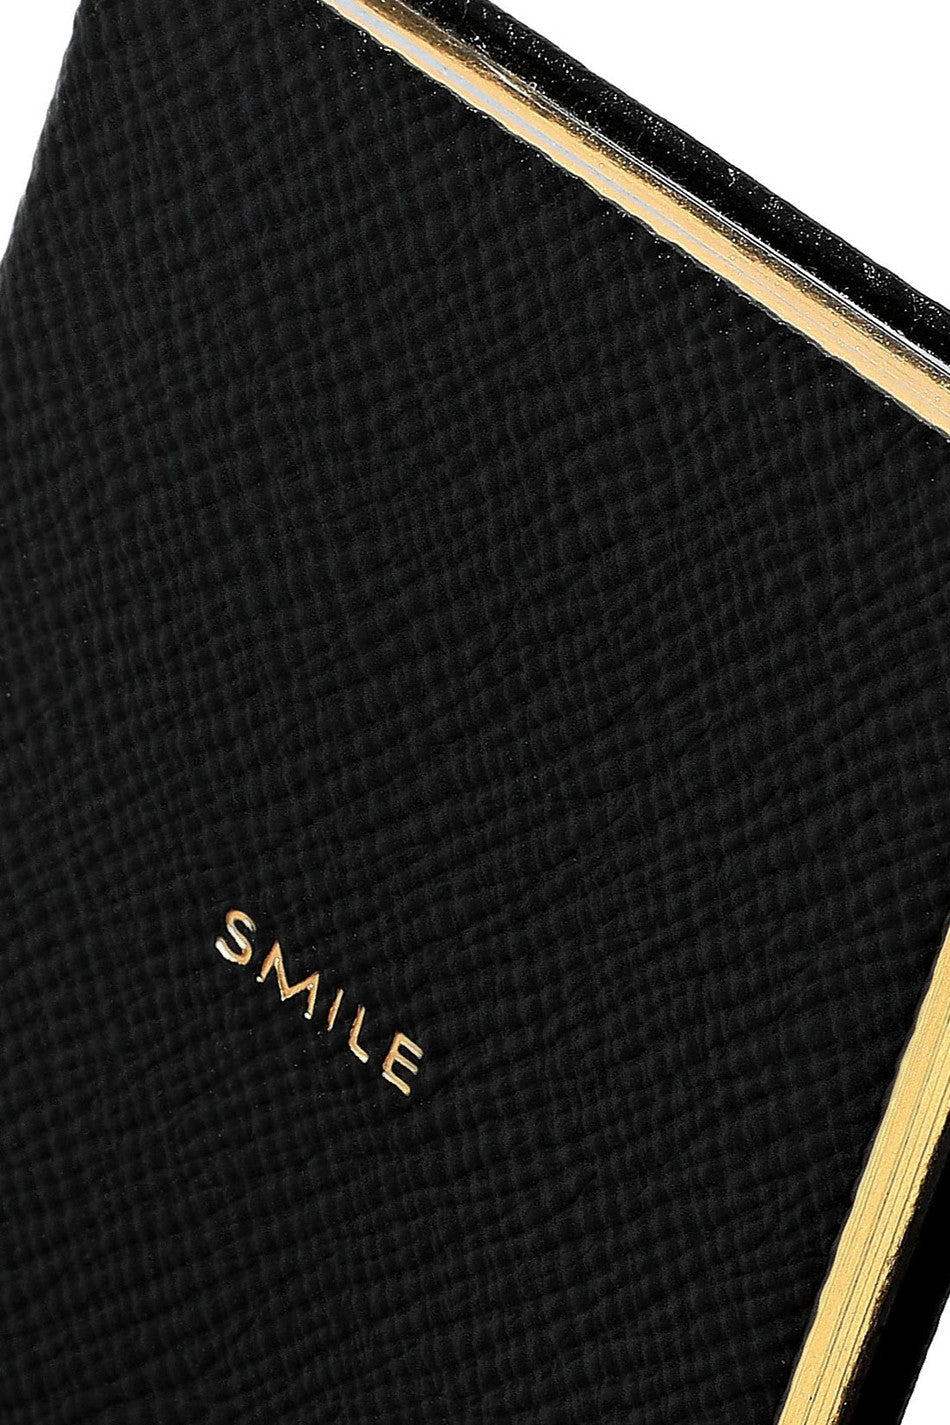 Shopping crush - SMYTHSON - Now or Never Wafer Notebook